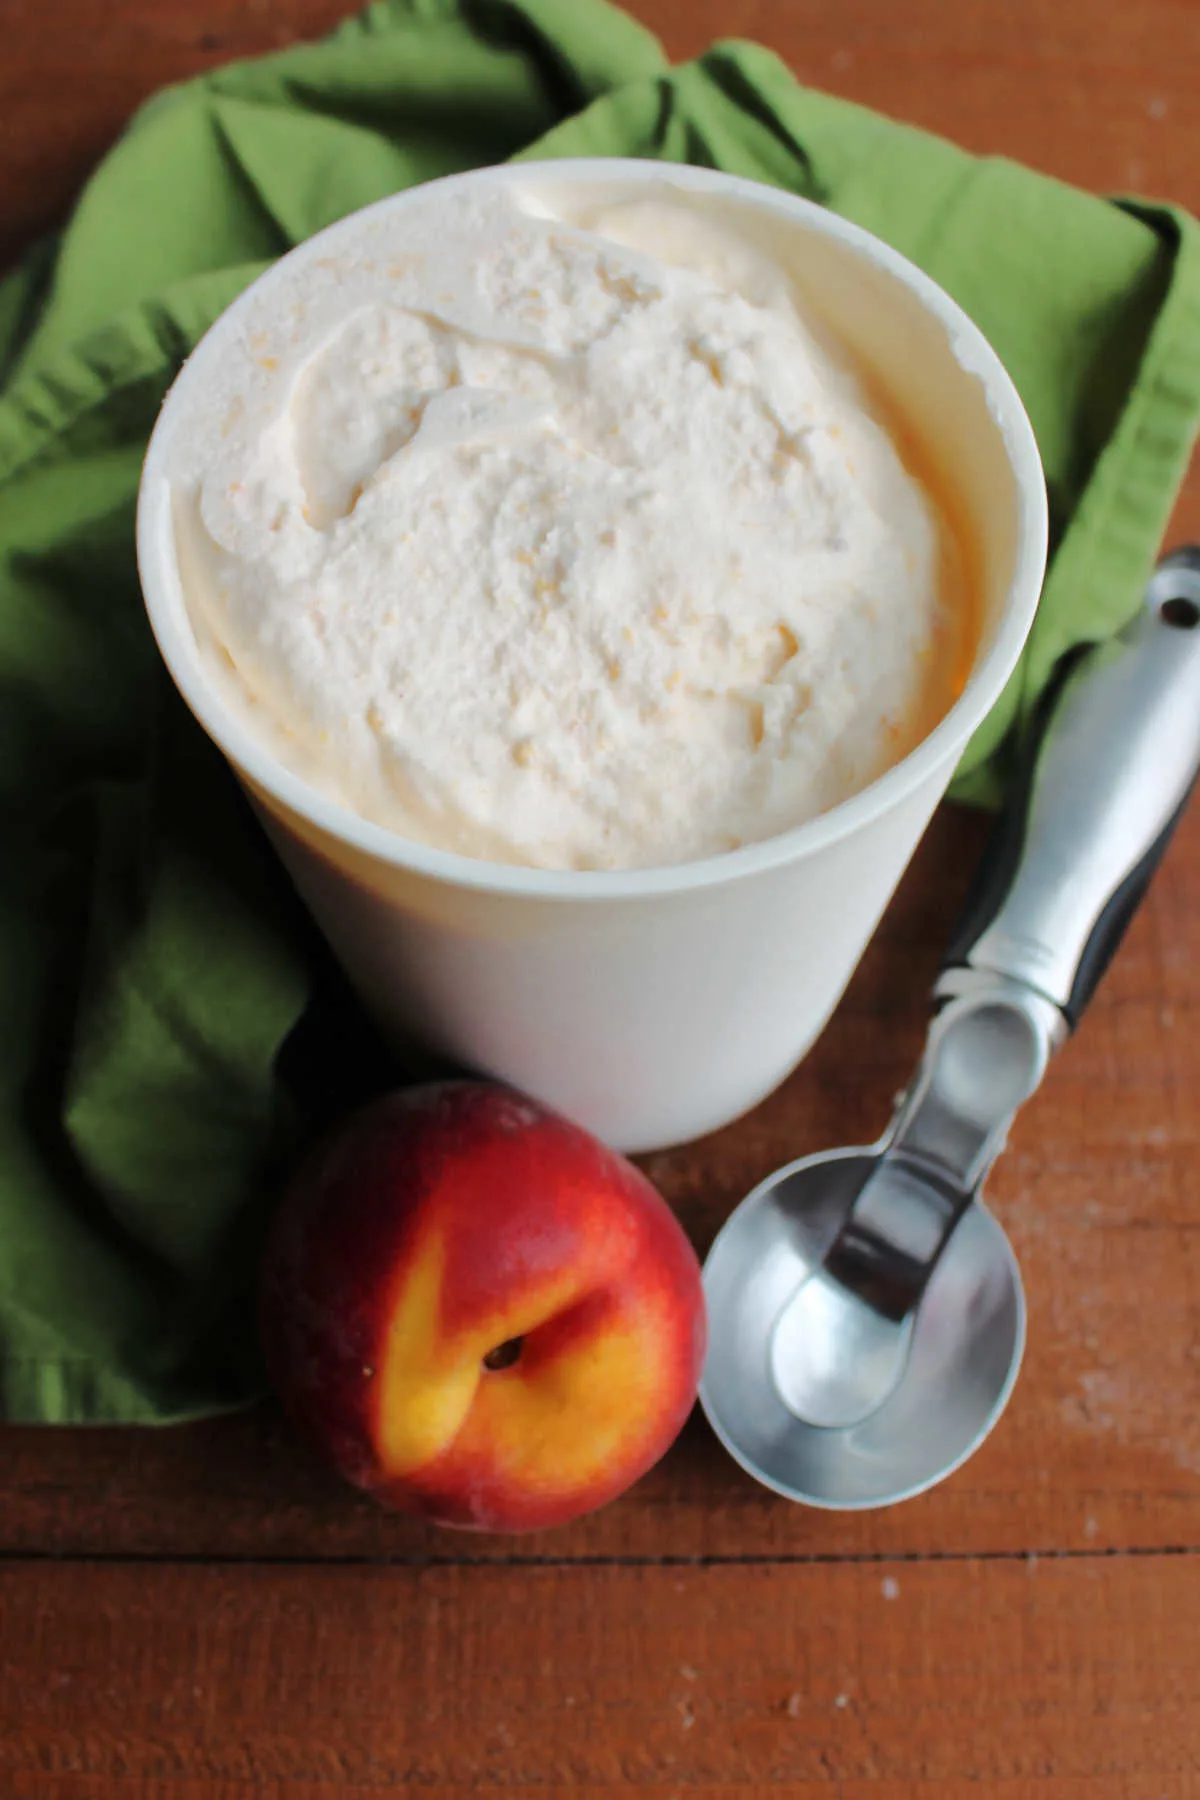 Container of fresh peach ice cream with a peach and scoop.